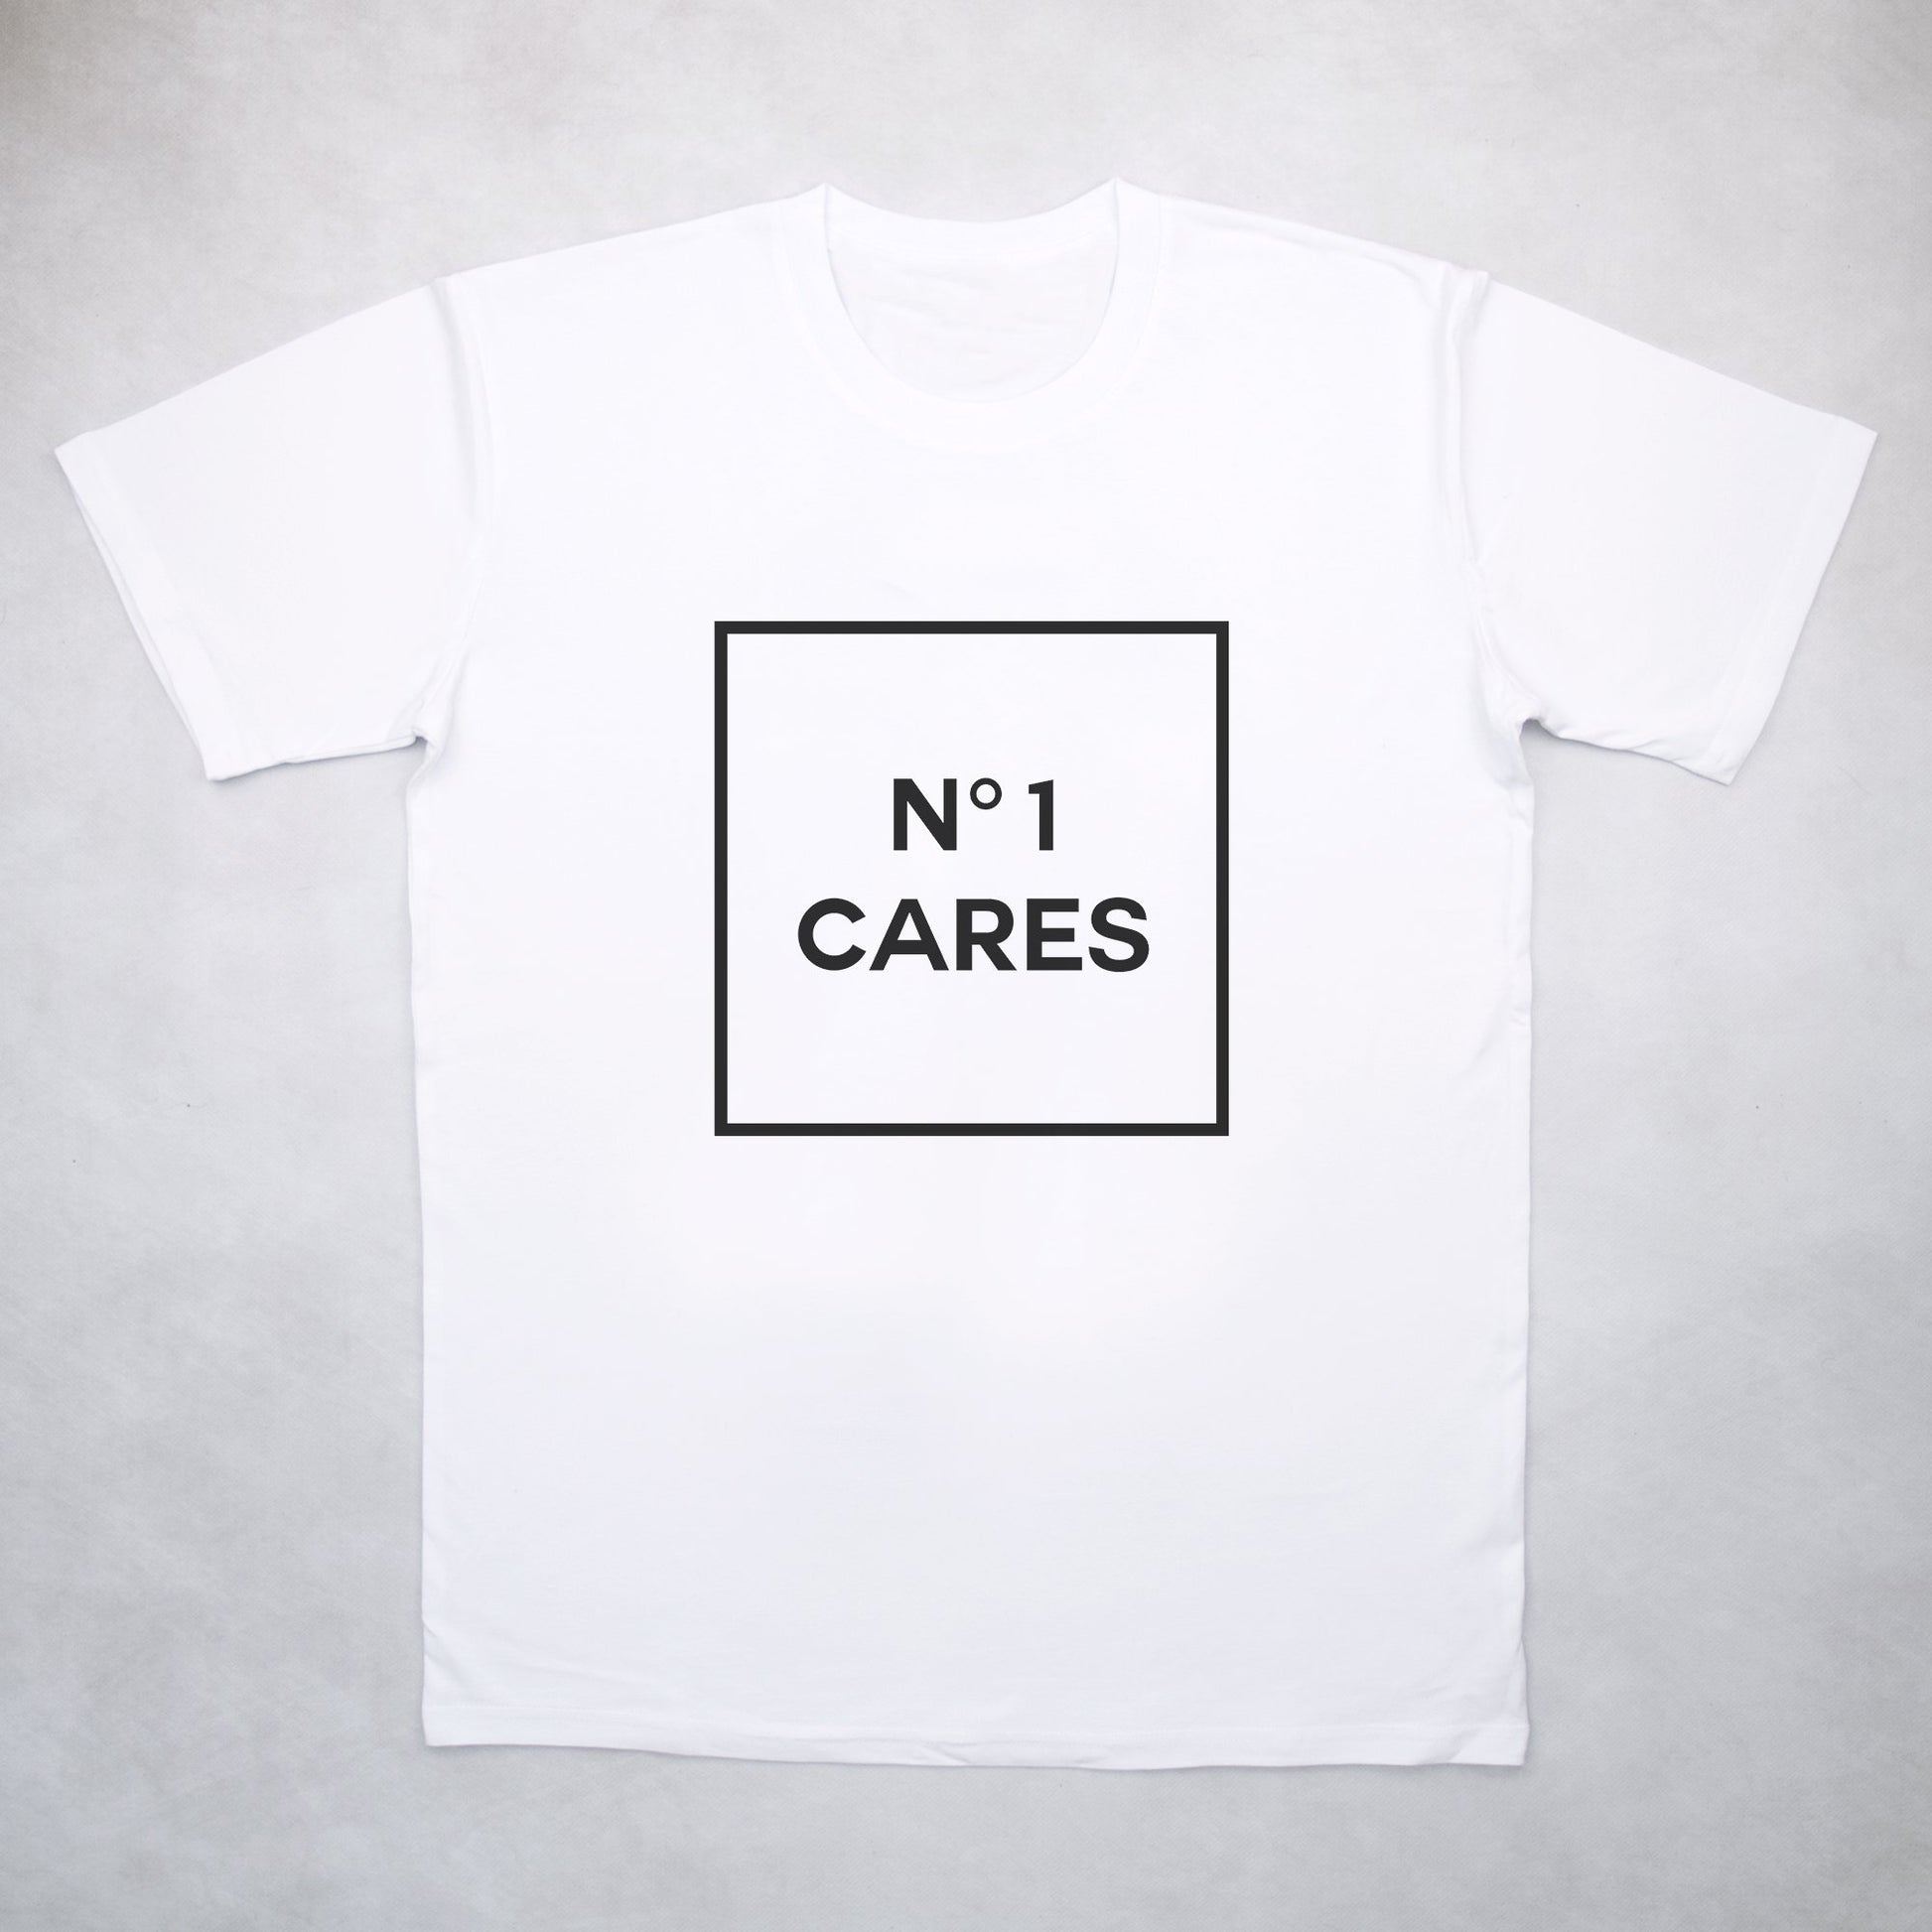 Classy Duds Short Sleeve T-Shirts No1 Cares Tee